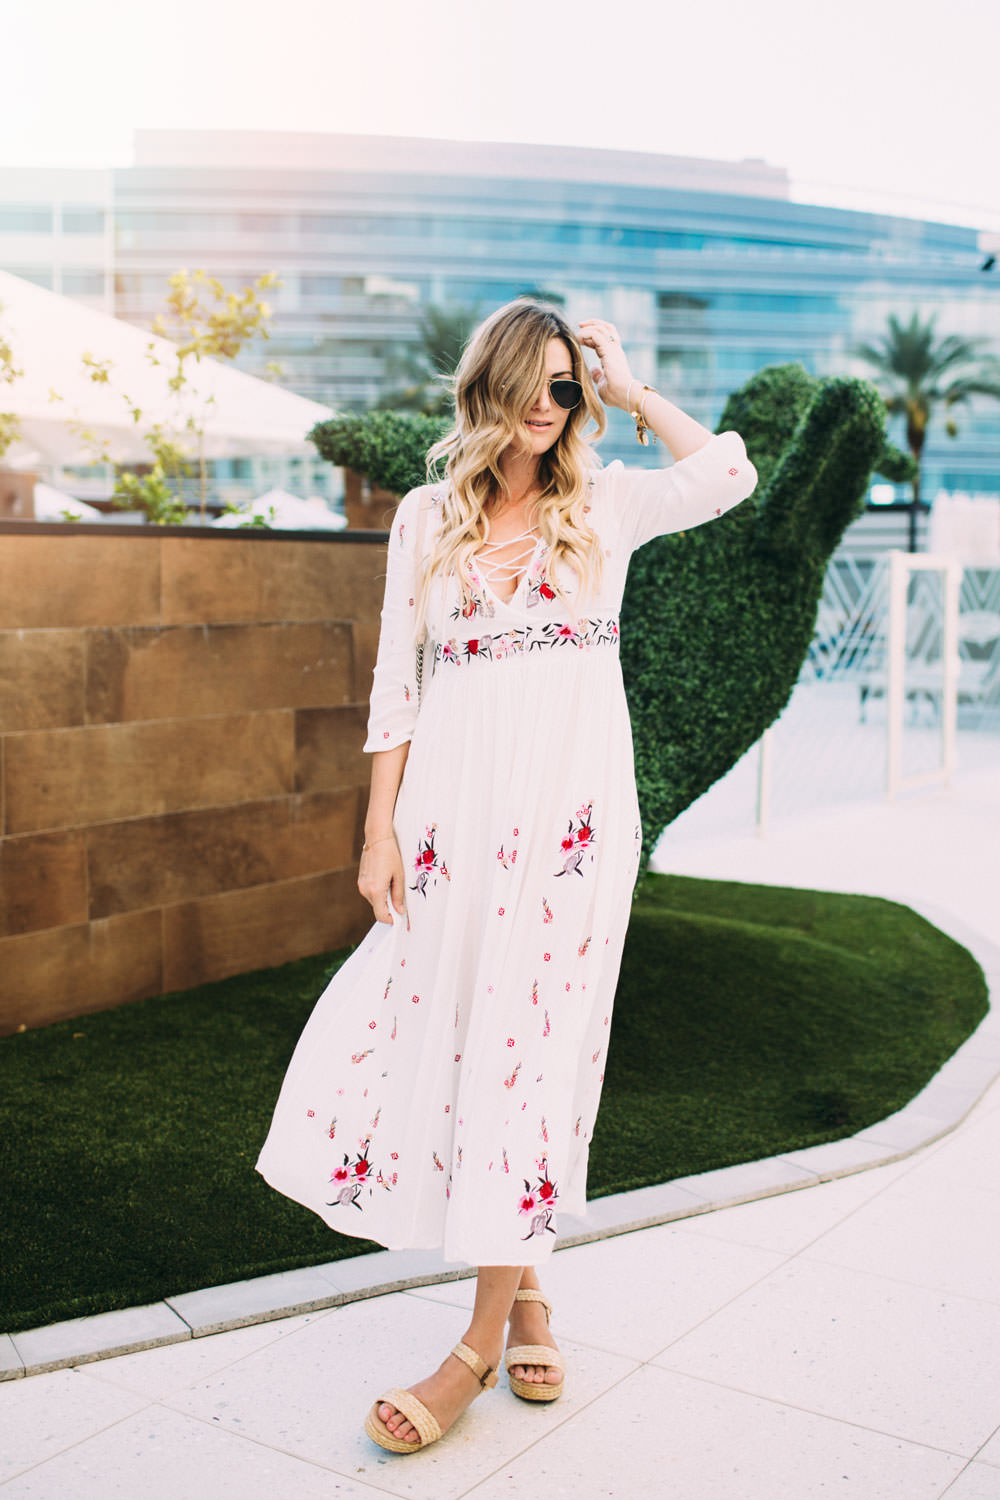 Dash of Darling wears a bohemian Chicwish white floral maxi dress and Loft wedge sandals during her staycation at the Camby Hotel in Pheonix, Arizona.